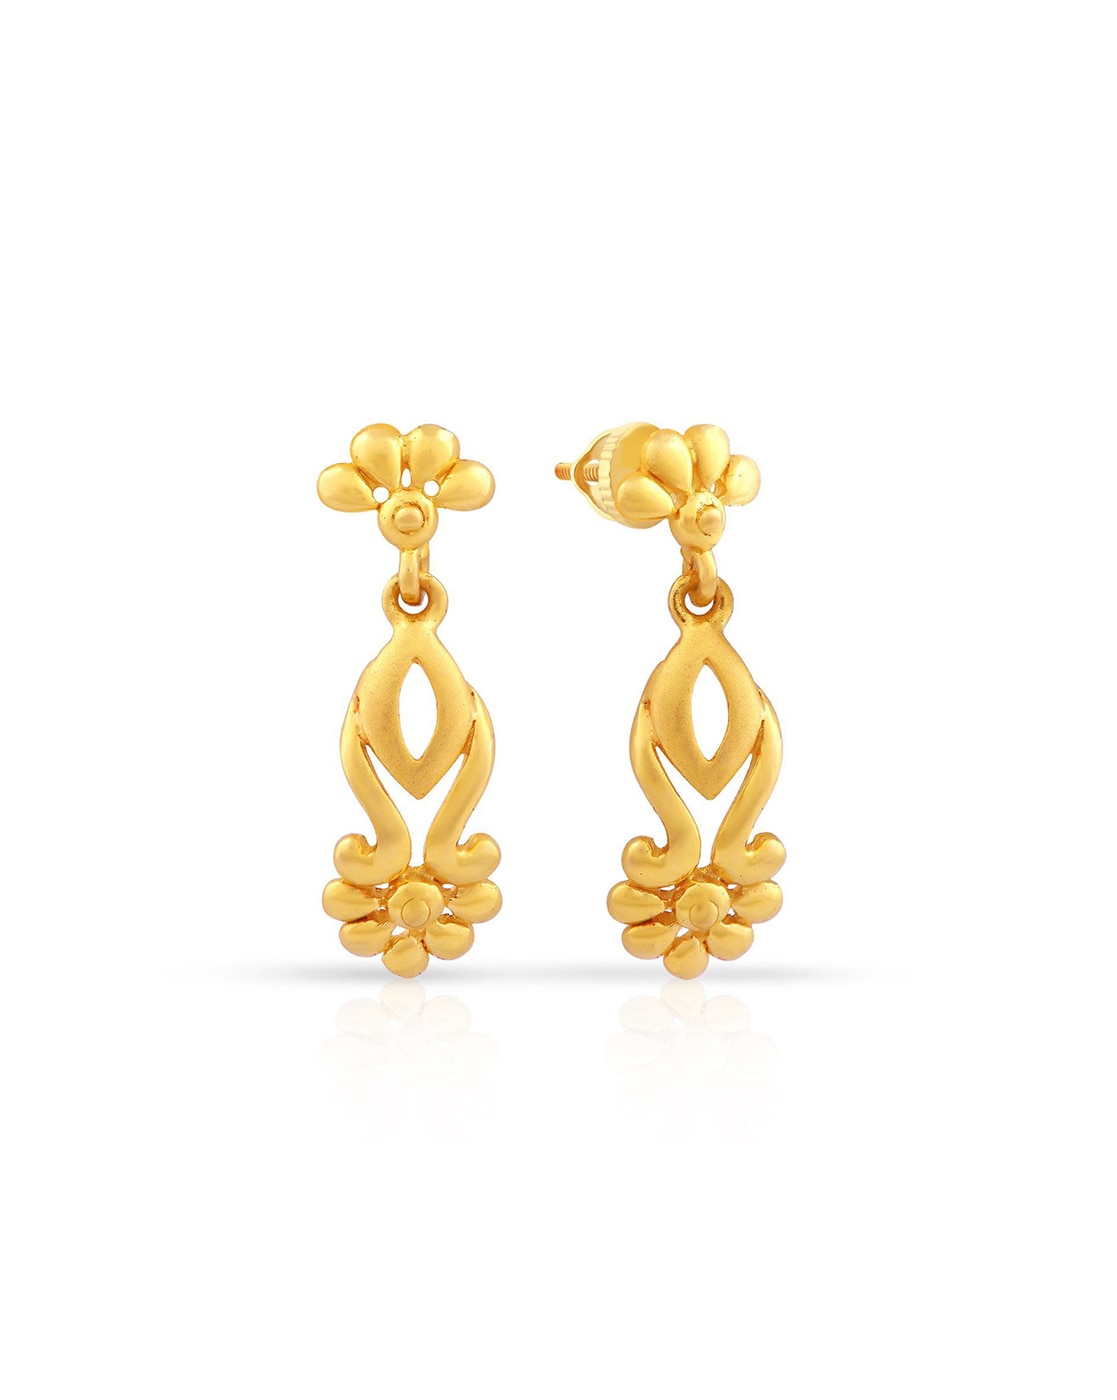 Buy Malabar Gold & Diamonds 22 Kt (916) Purity Yellow Gold Earring  100001326247 For Women at Amazon.in